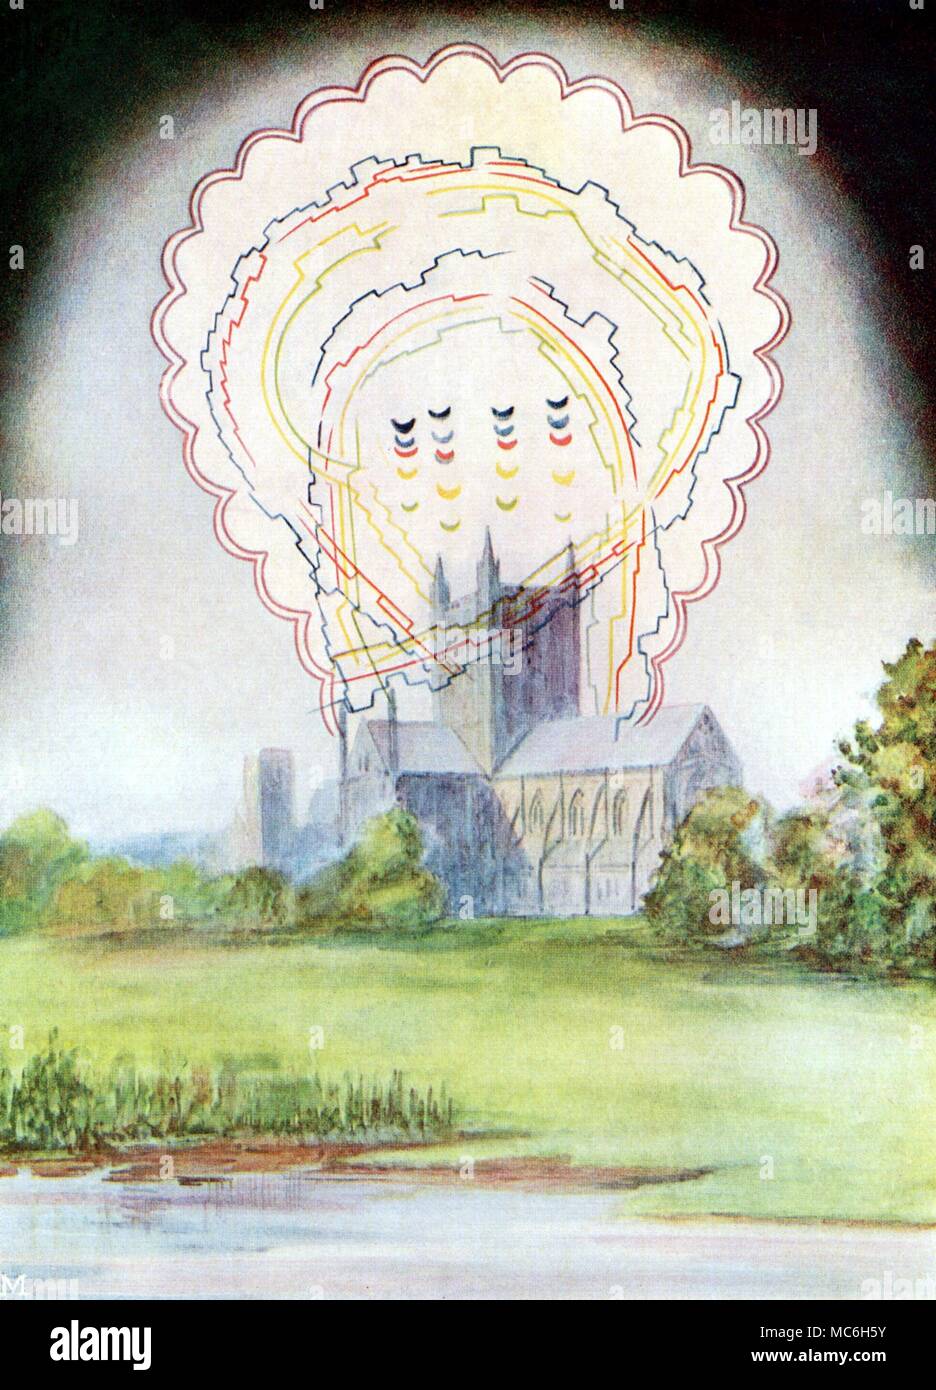 THEOSOPHY - THOUGHT-FORMS - ASTRAL PLANE Occult vision of the music of Mendelssohn, being played on a church organ. Paintings of thought-forms were originated by a group of Theosophists, towards the end of the nineteenth century. The paintings were done, following the occult observations of such 'thoughts' or 'visions' on the astral plane, by Charles Leadbeater (Besant claimed such an astral vision, but it is unlikely that this was genuine), by John Varley (a descendant of the John Varley who taught William Blake astrology), Mr. Prince and Miss Macfarlane, all three of whom painted 'in earth Stock Photo